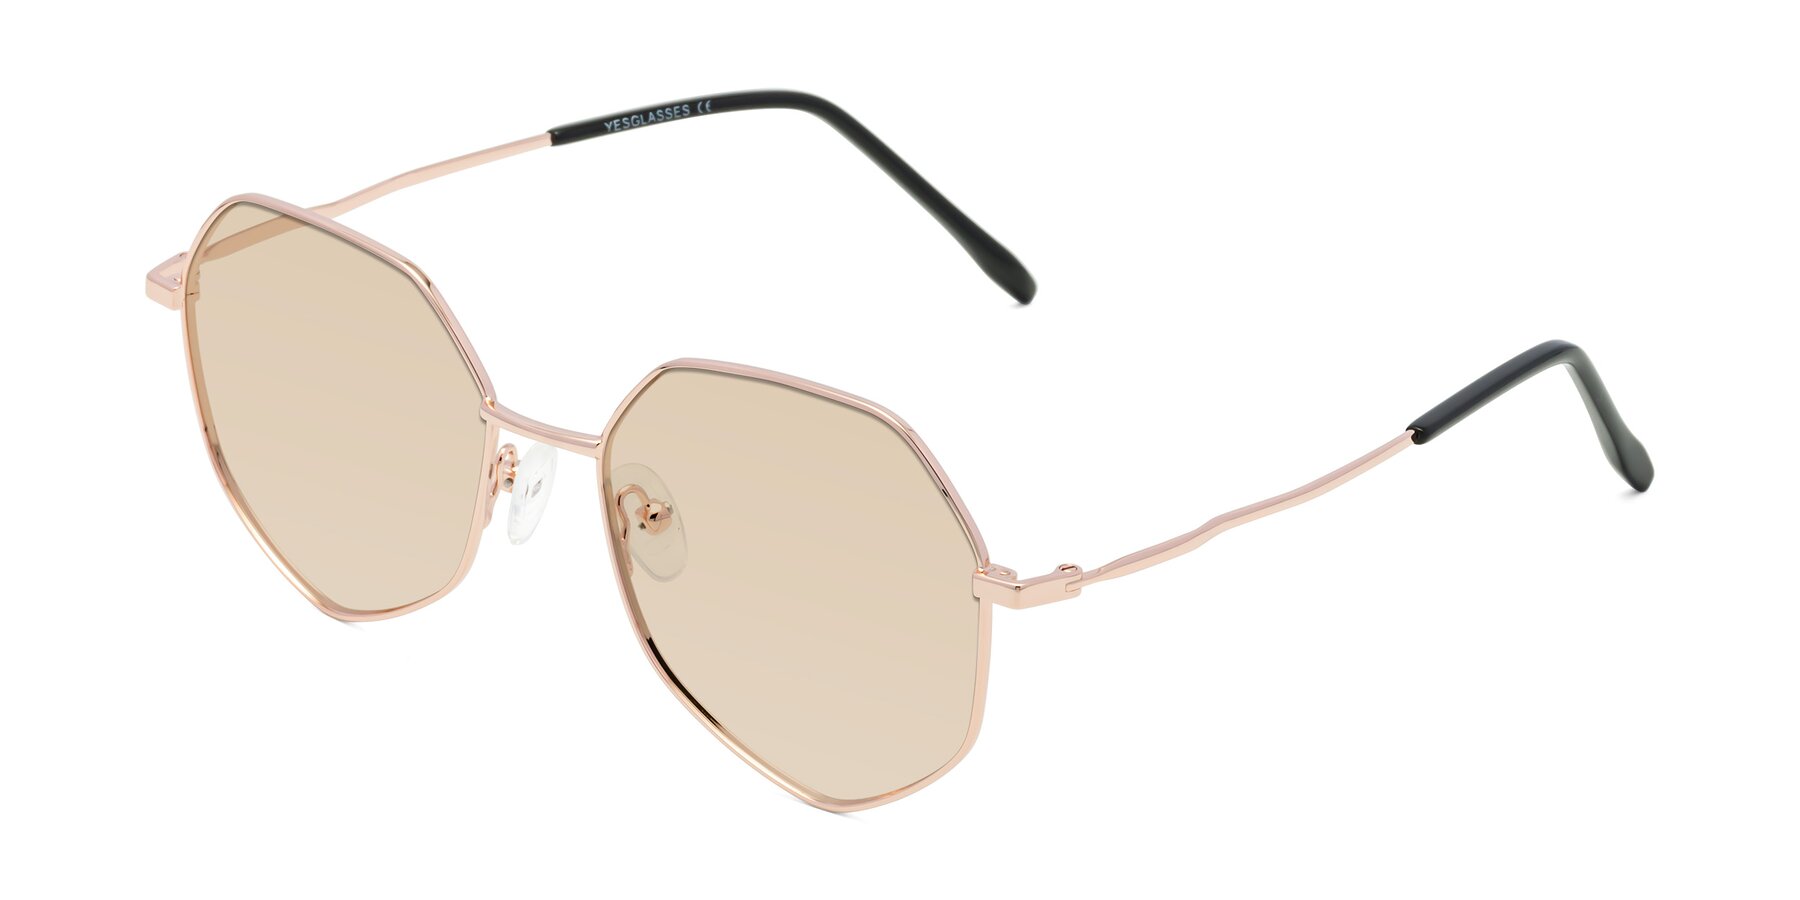 Angle of Sunshine in Rose Gold with Light Brown Tinted Lenses